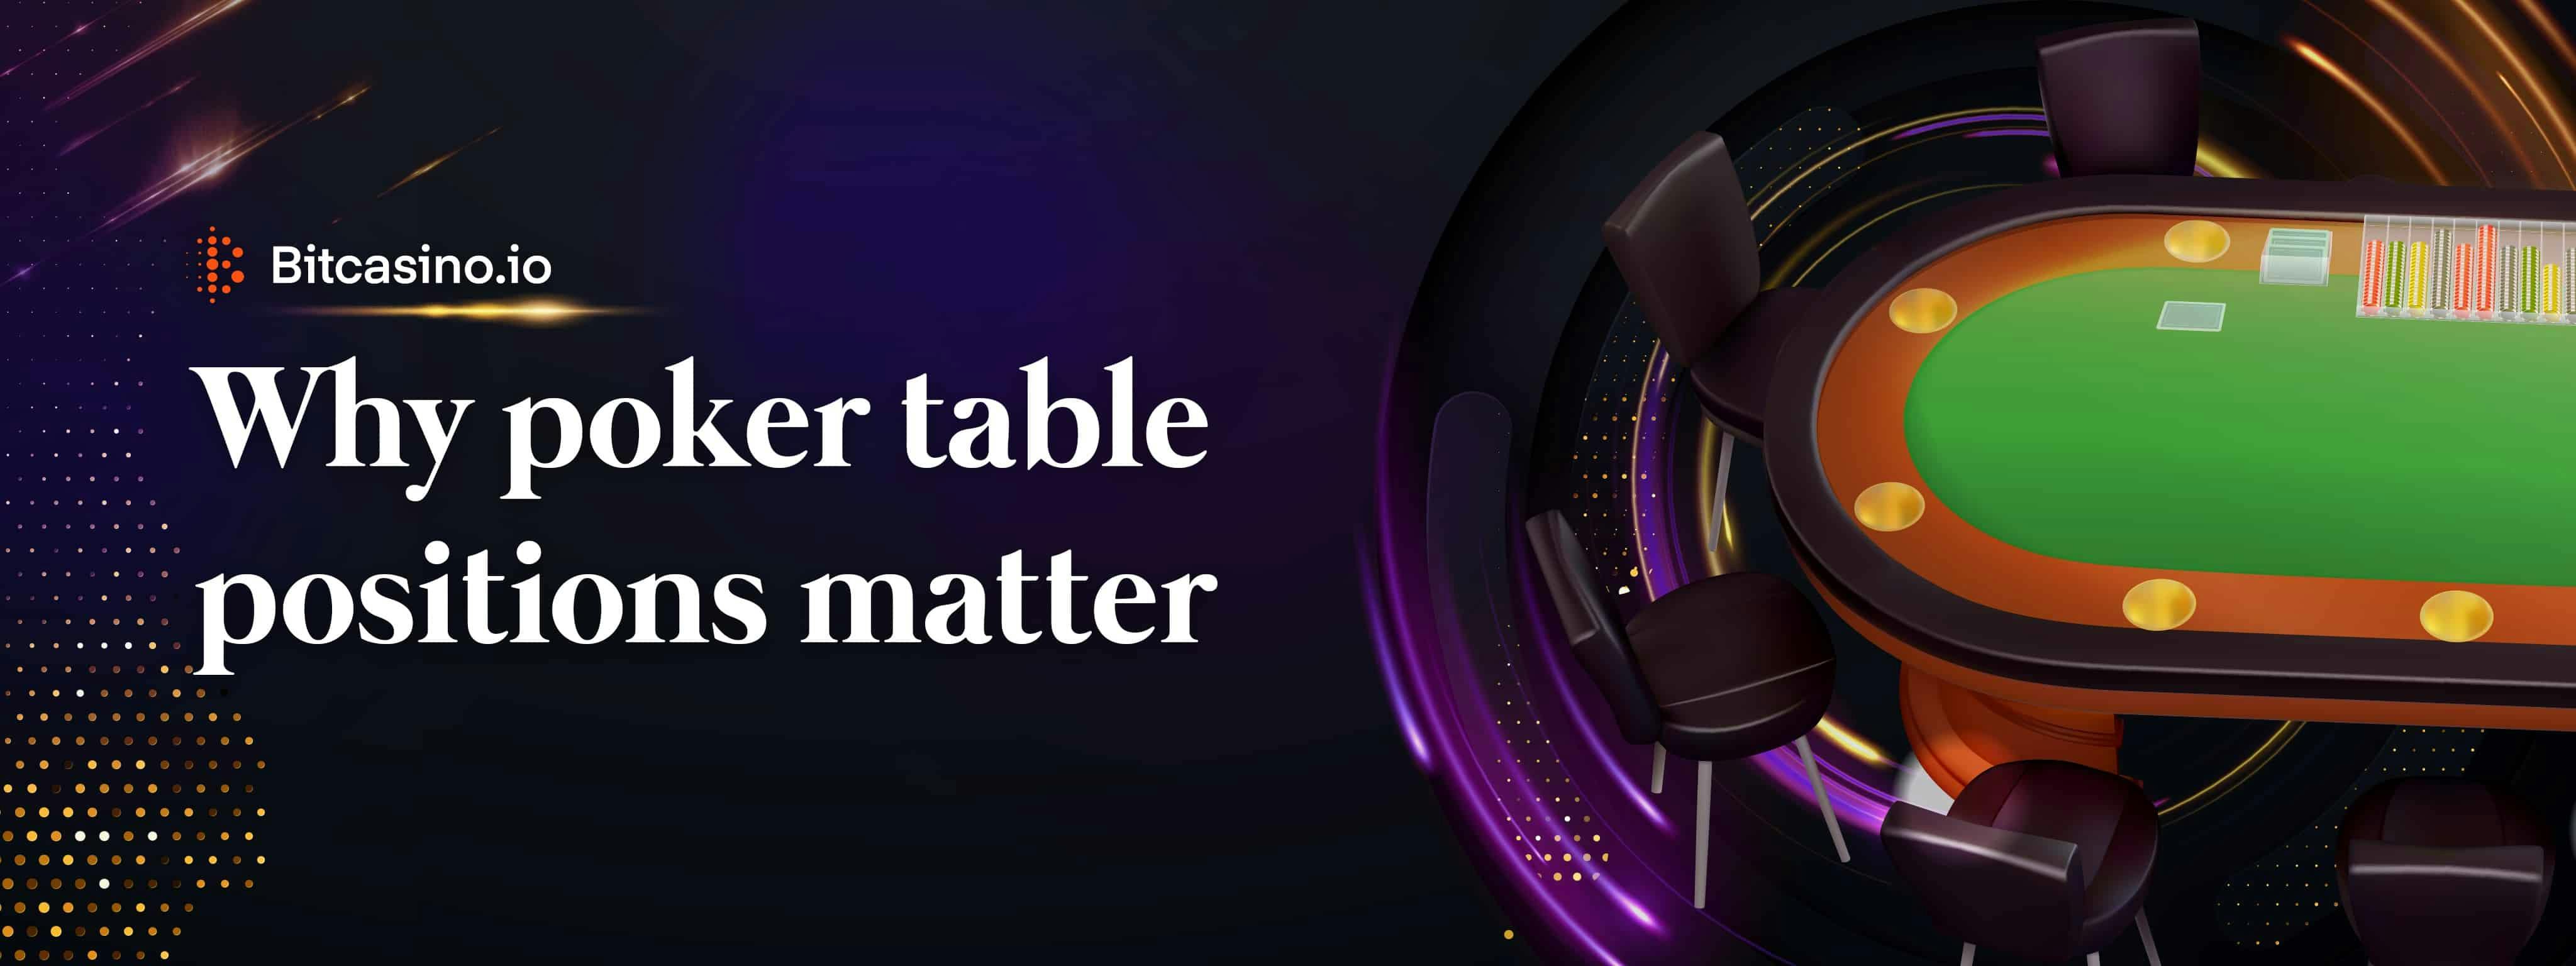 The importance of Poker Table Positions in winning